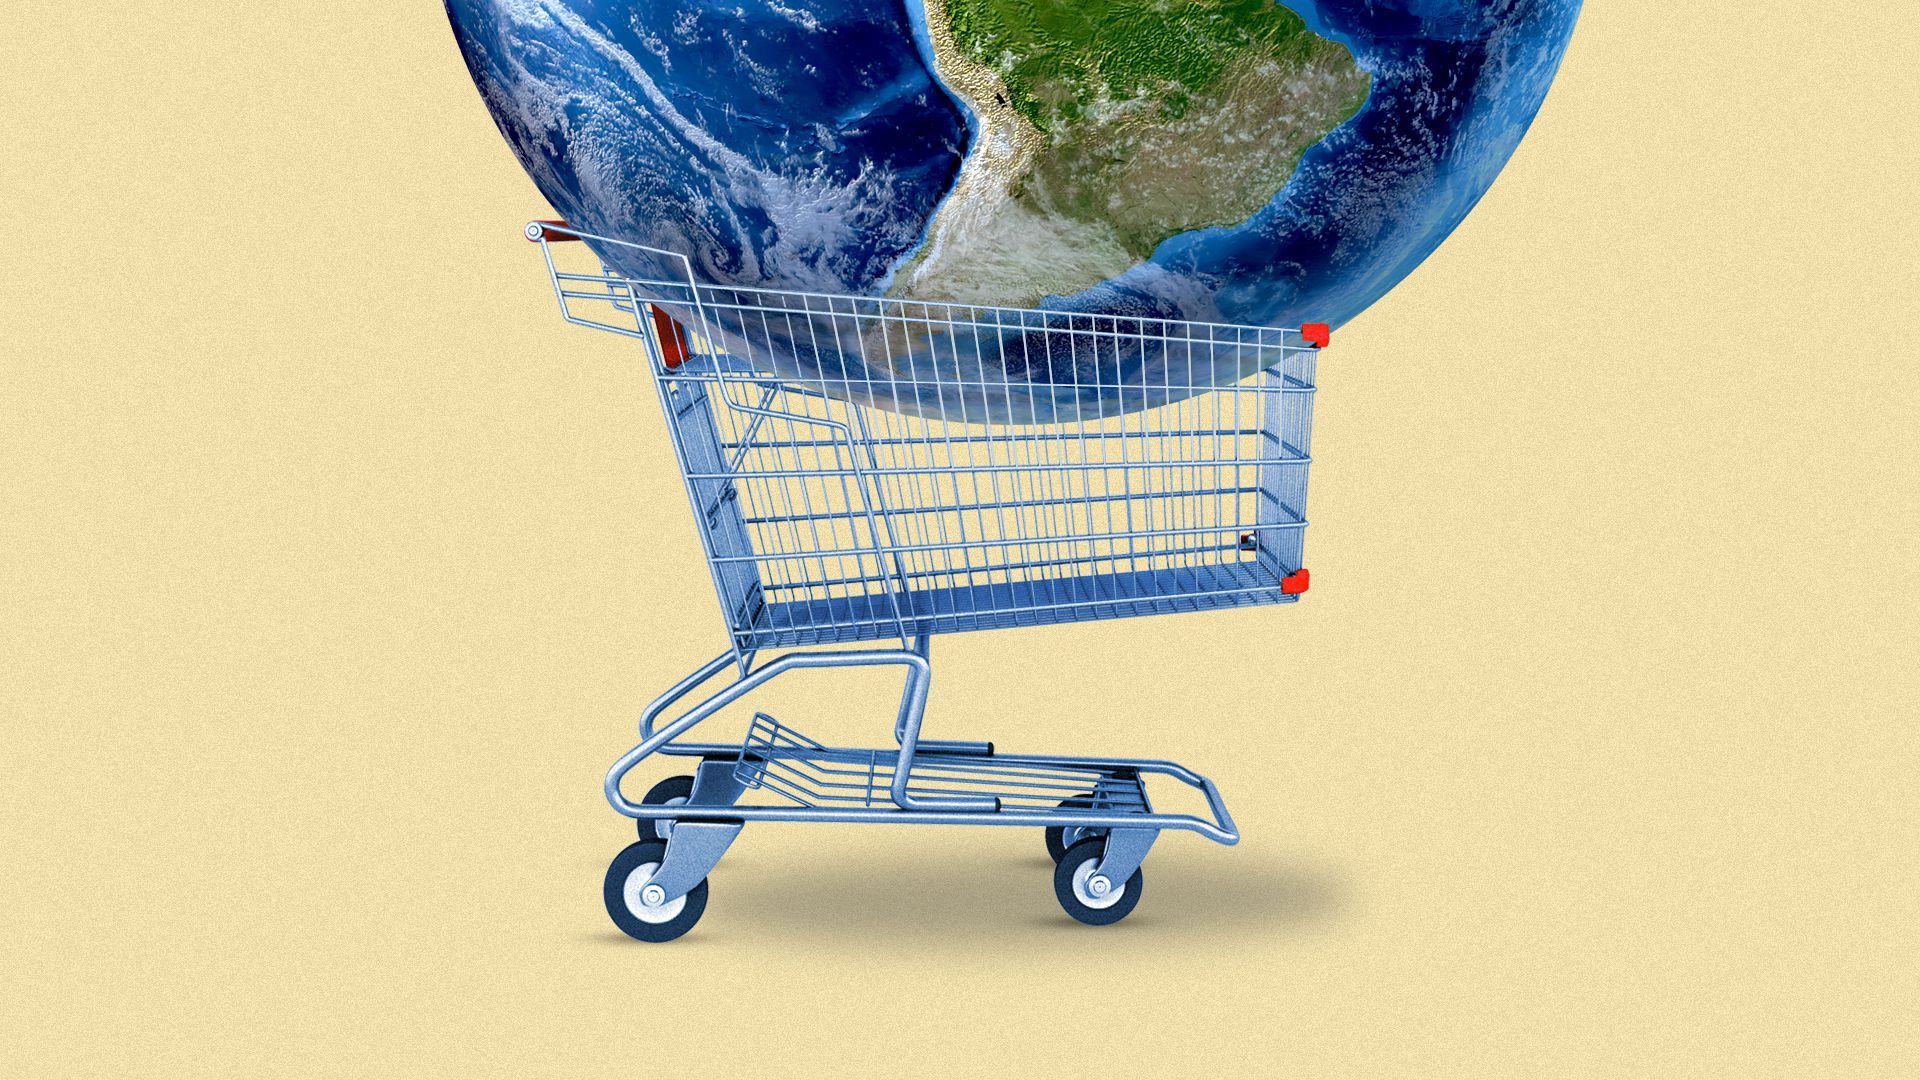 Illustration of a shopping cart with a globe sitting in it